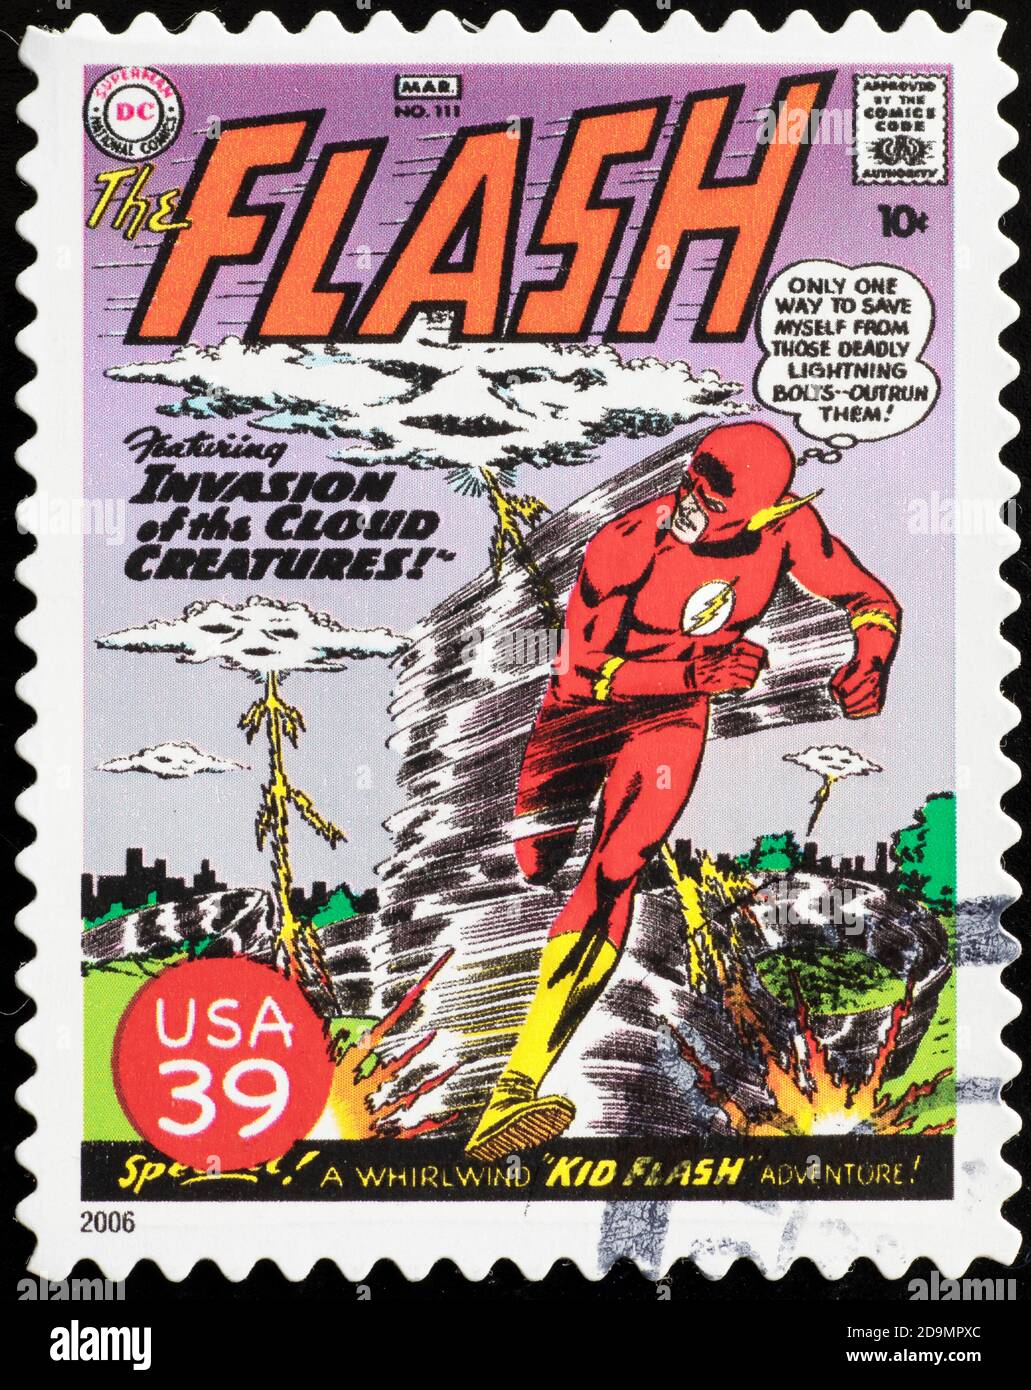 Cover of The Flash magazine on american stamp Stock Photo